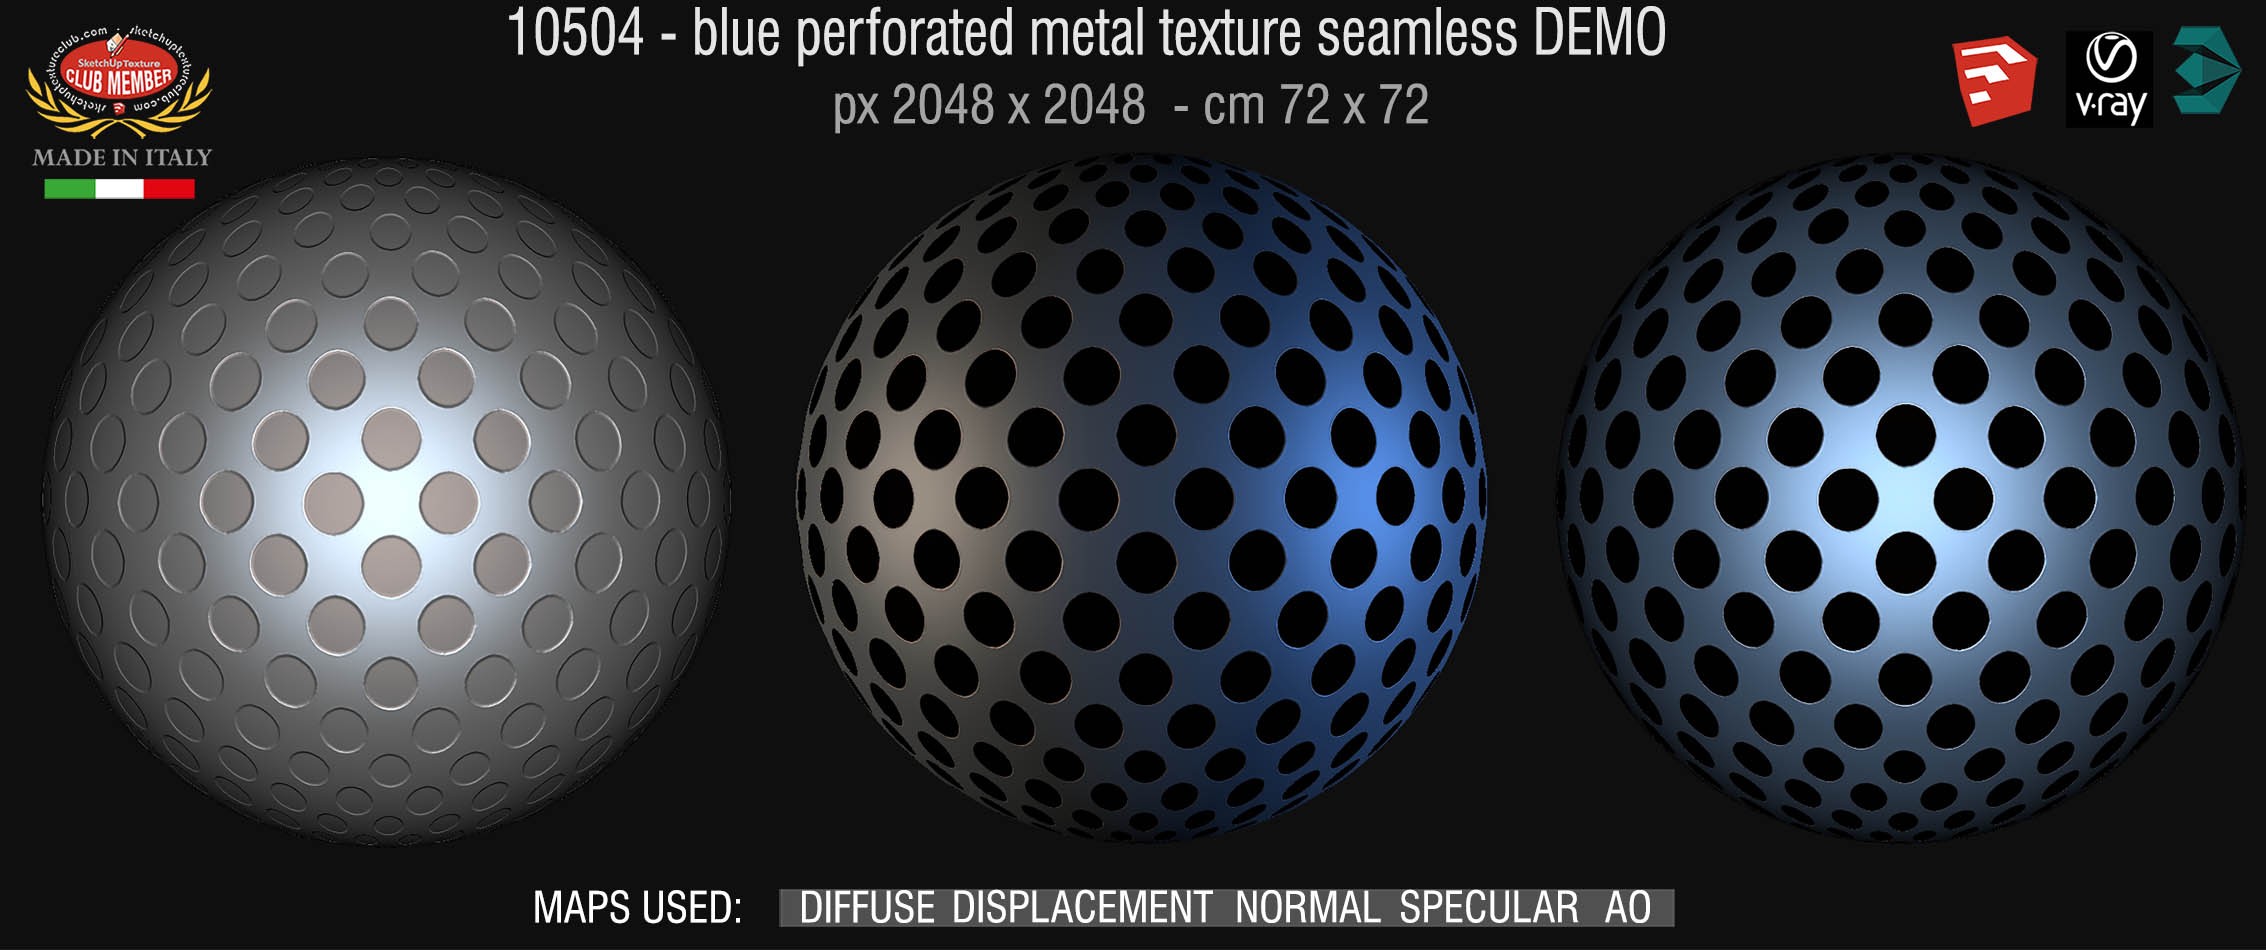 10504 HR Blue perforated metal texture seamless + maps DEMO